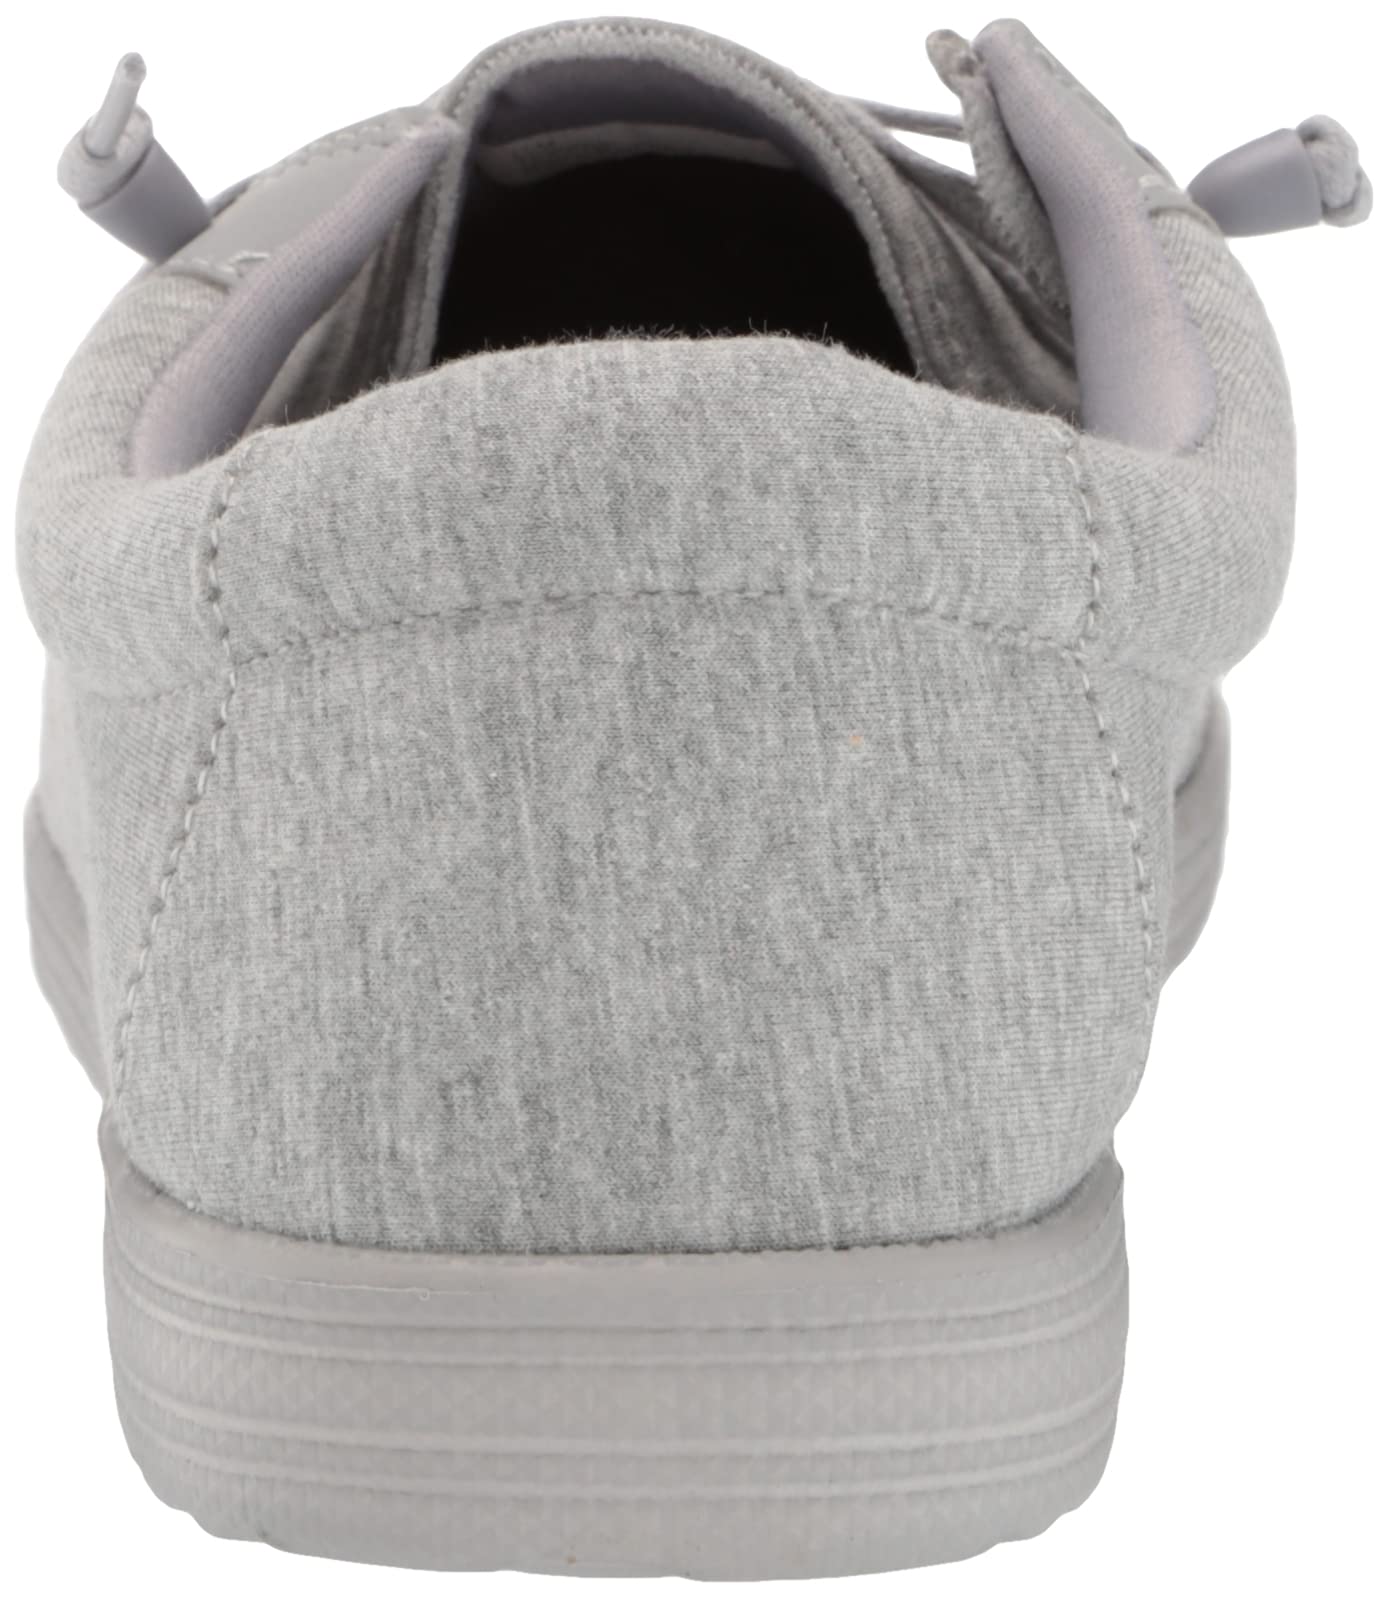 GBX Men's Bowery Canvas Slip-On Shoes